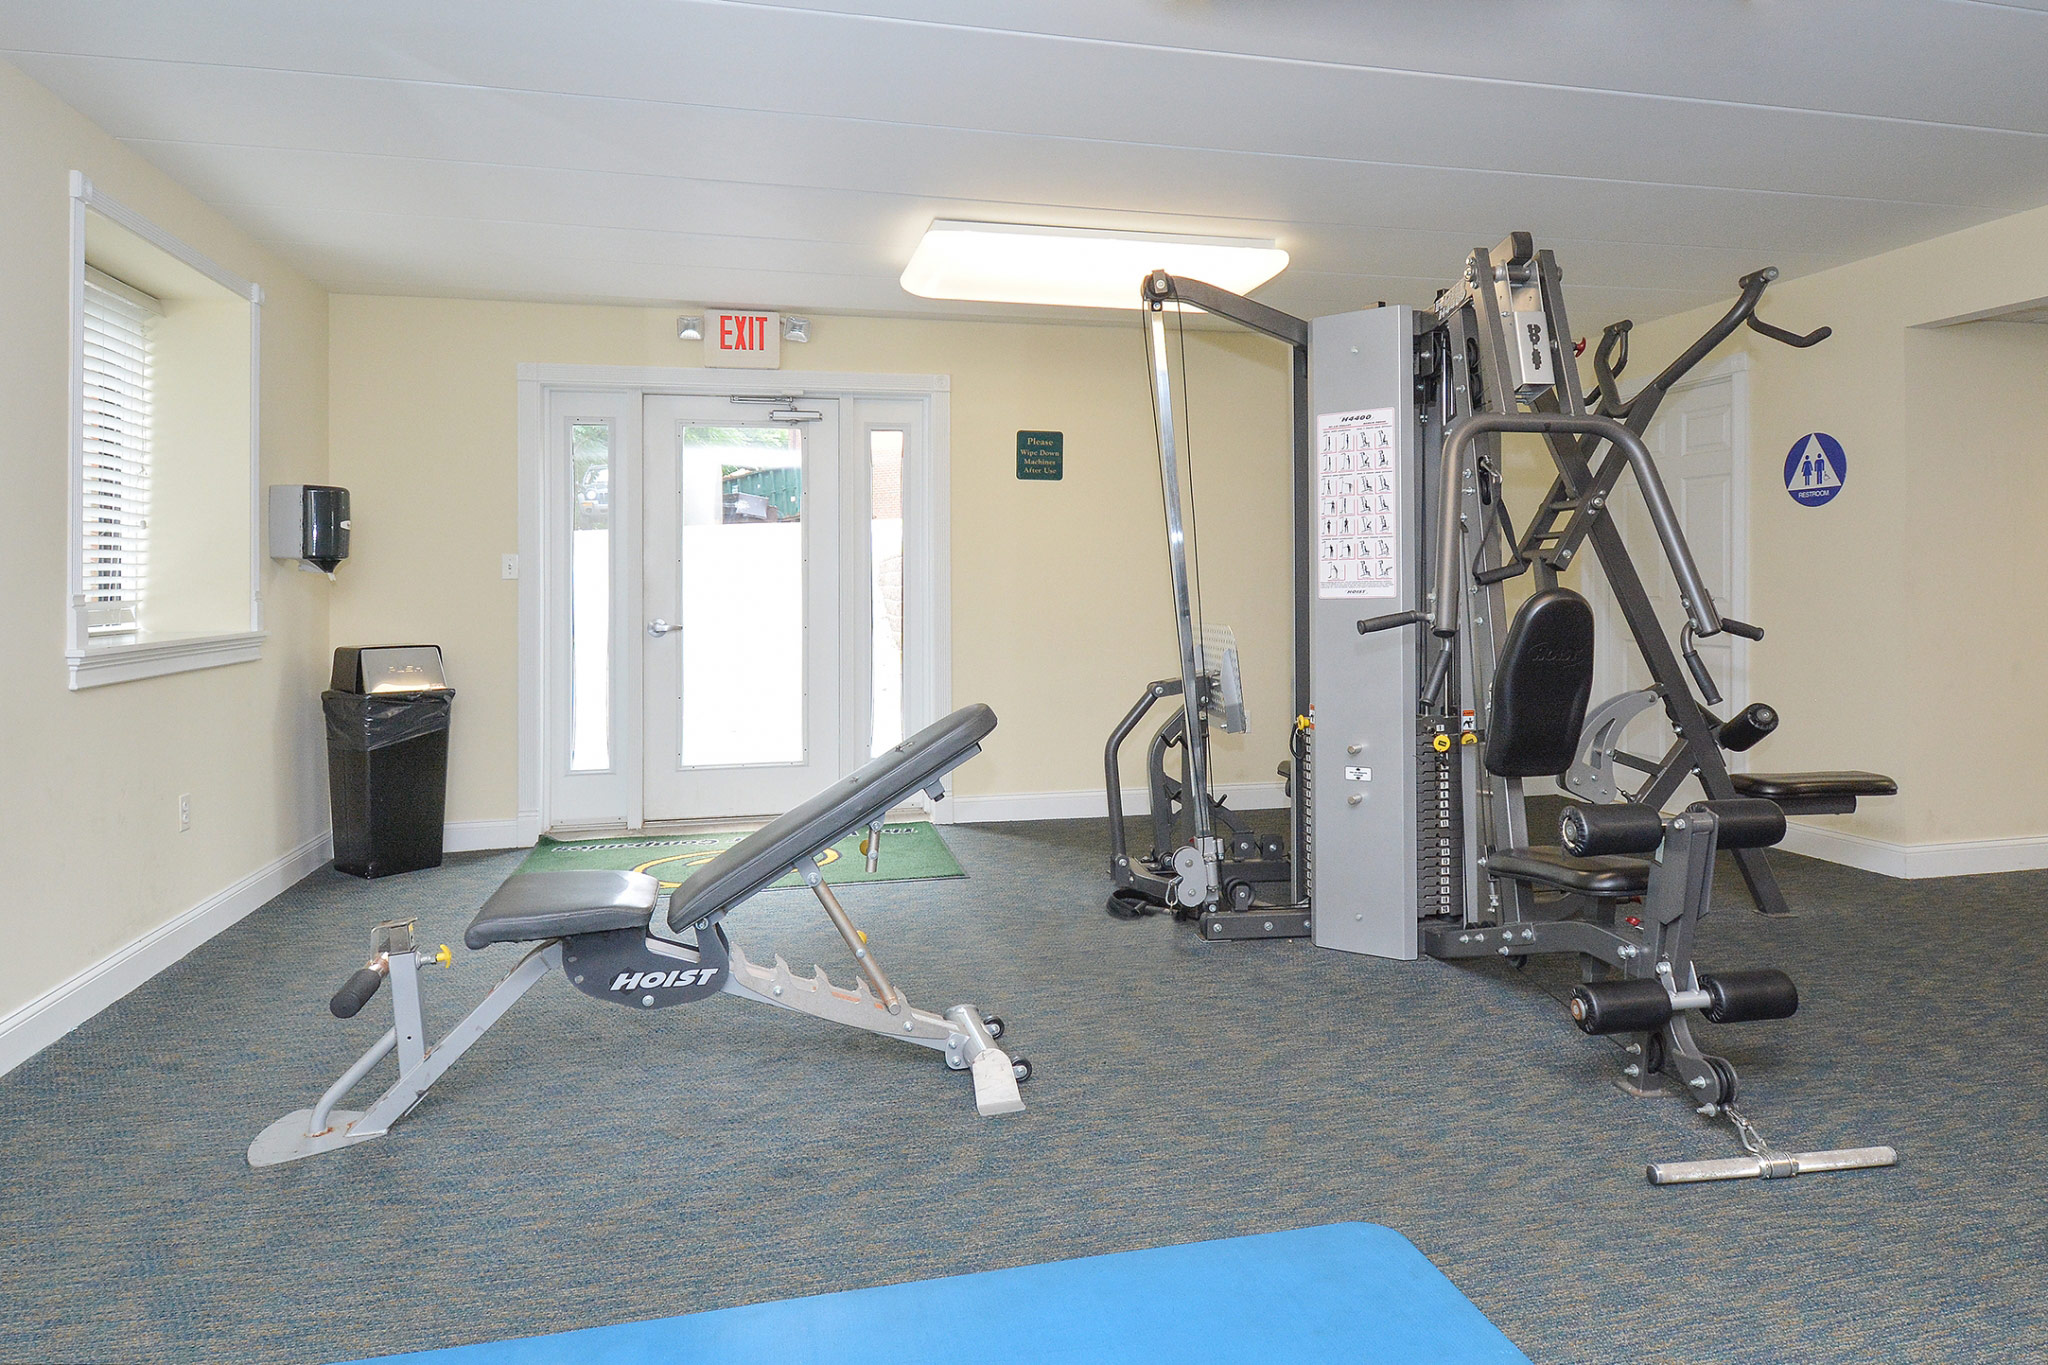 Area of our Fitness center in our community, fitted with fitness machines, soft flooring, and exit